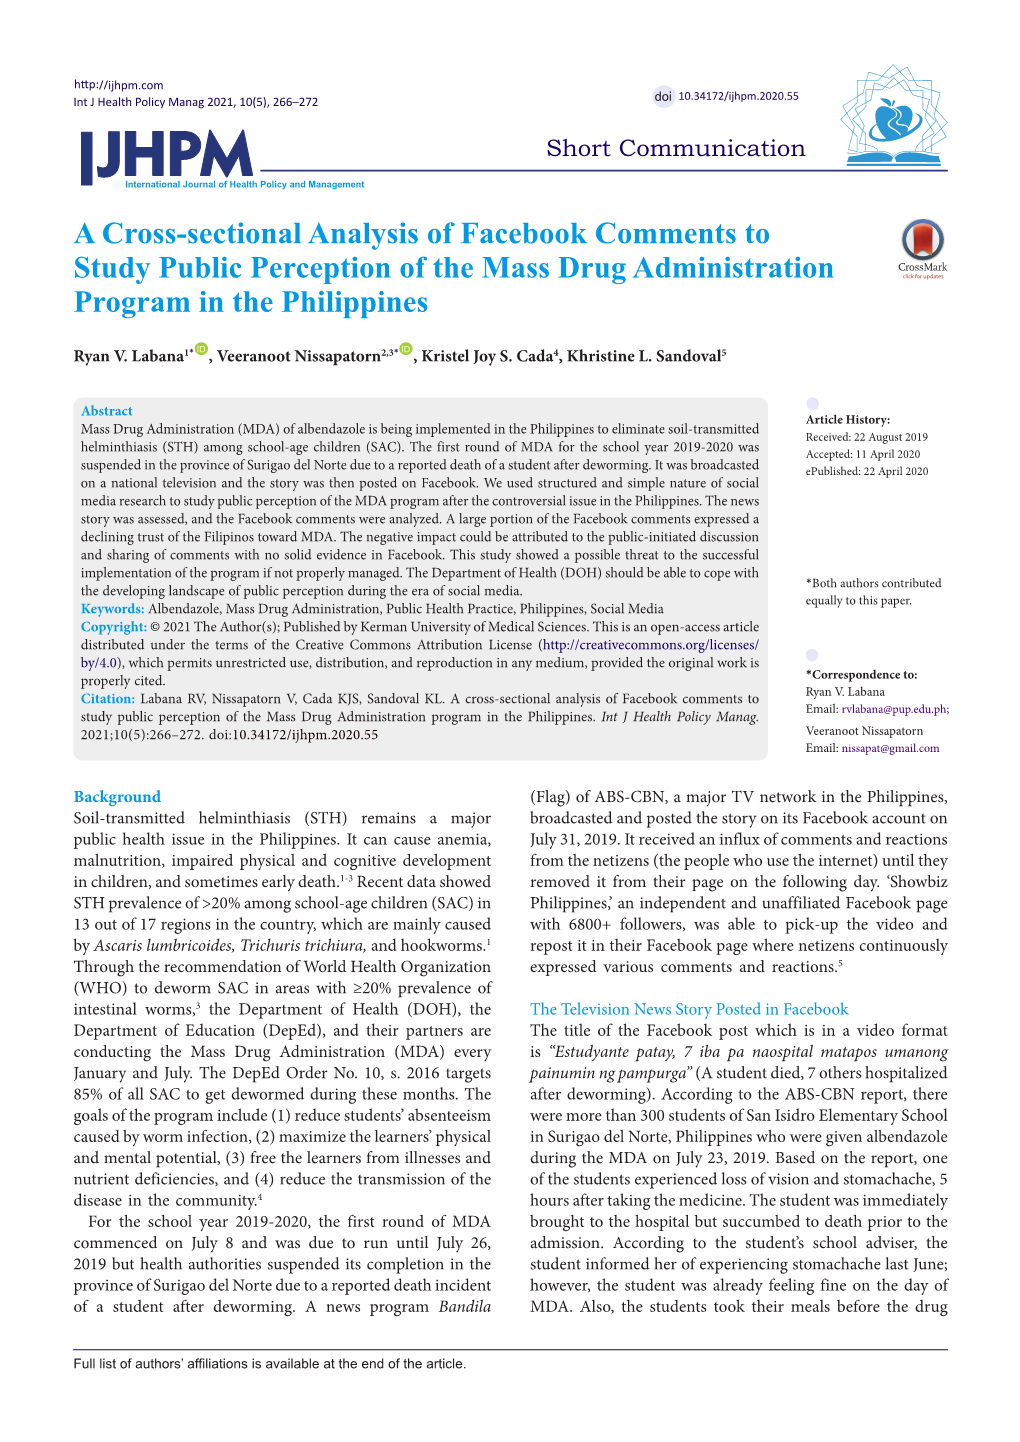 A Cross-Sectional Analysis of Facebook Comments to Study Public Perception of the Mass Drug Administration Program in the Philippines